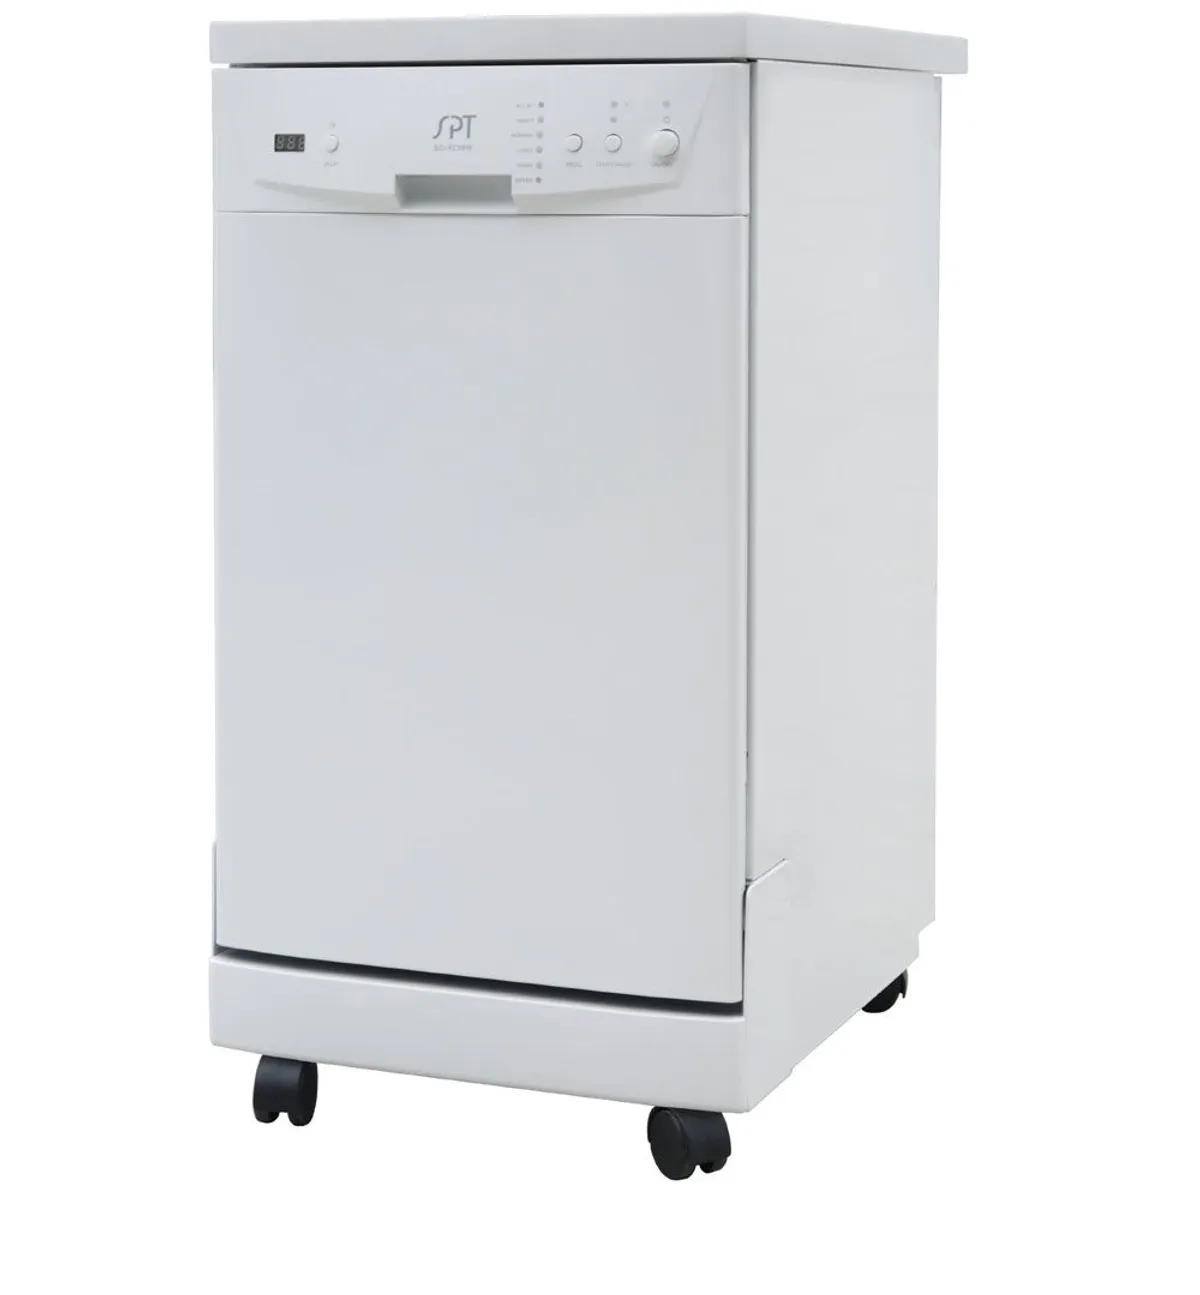 SPT SD-9241SS Energy Star Portable Dishwasher Review